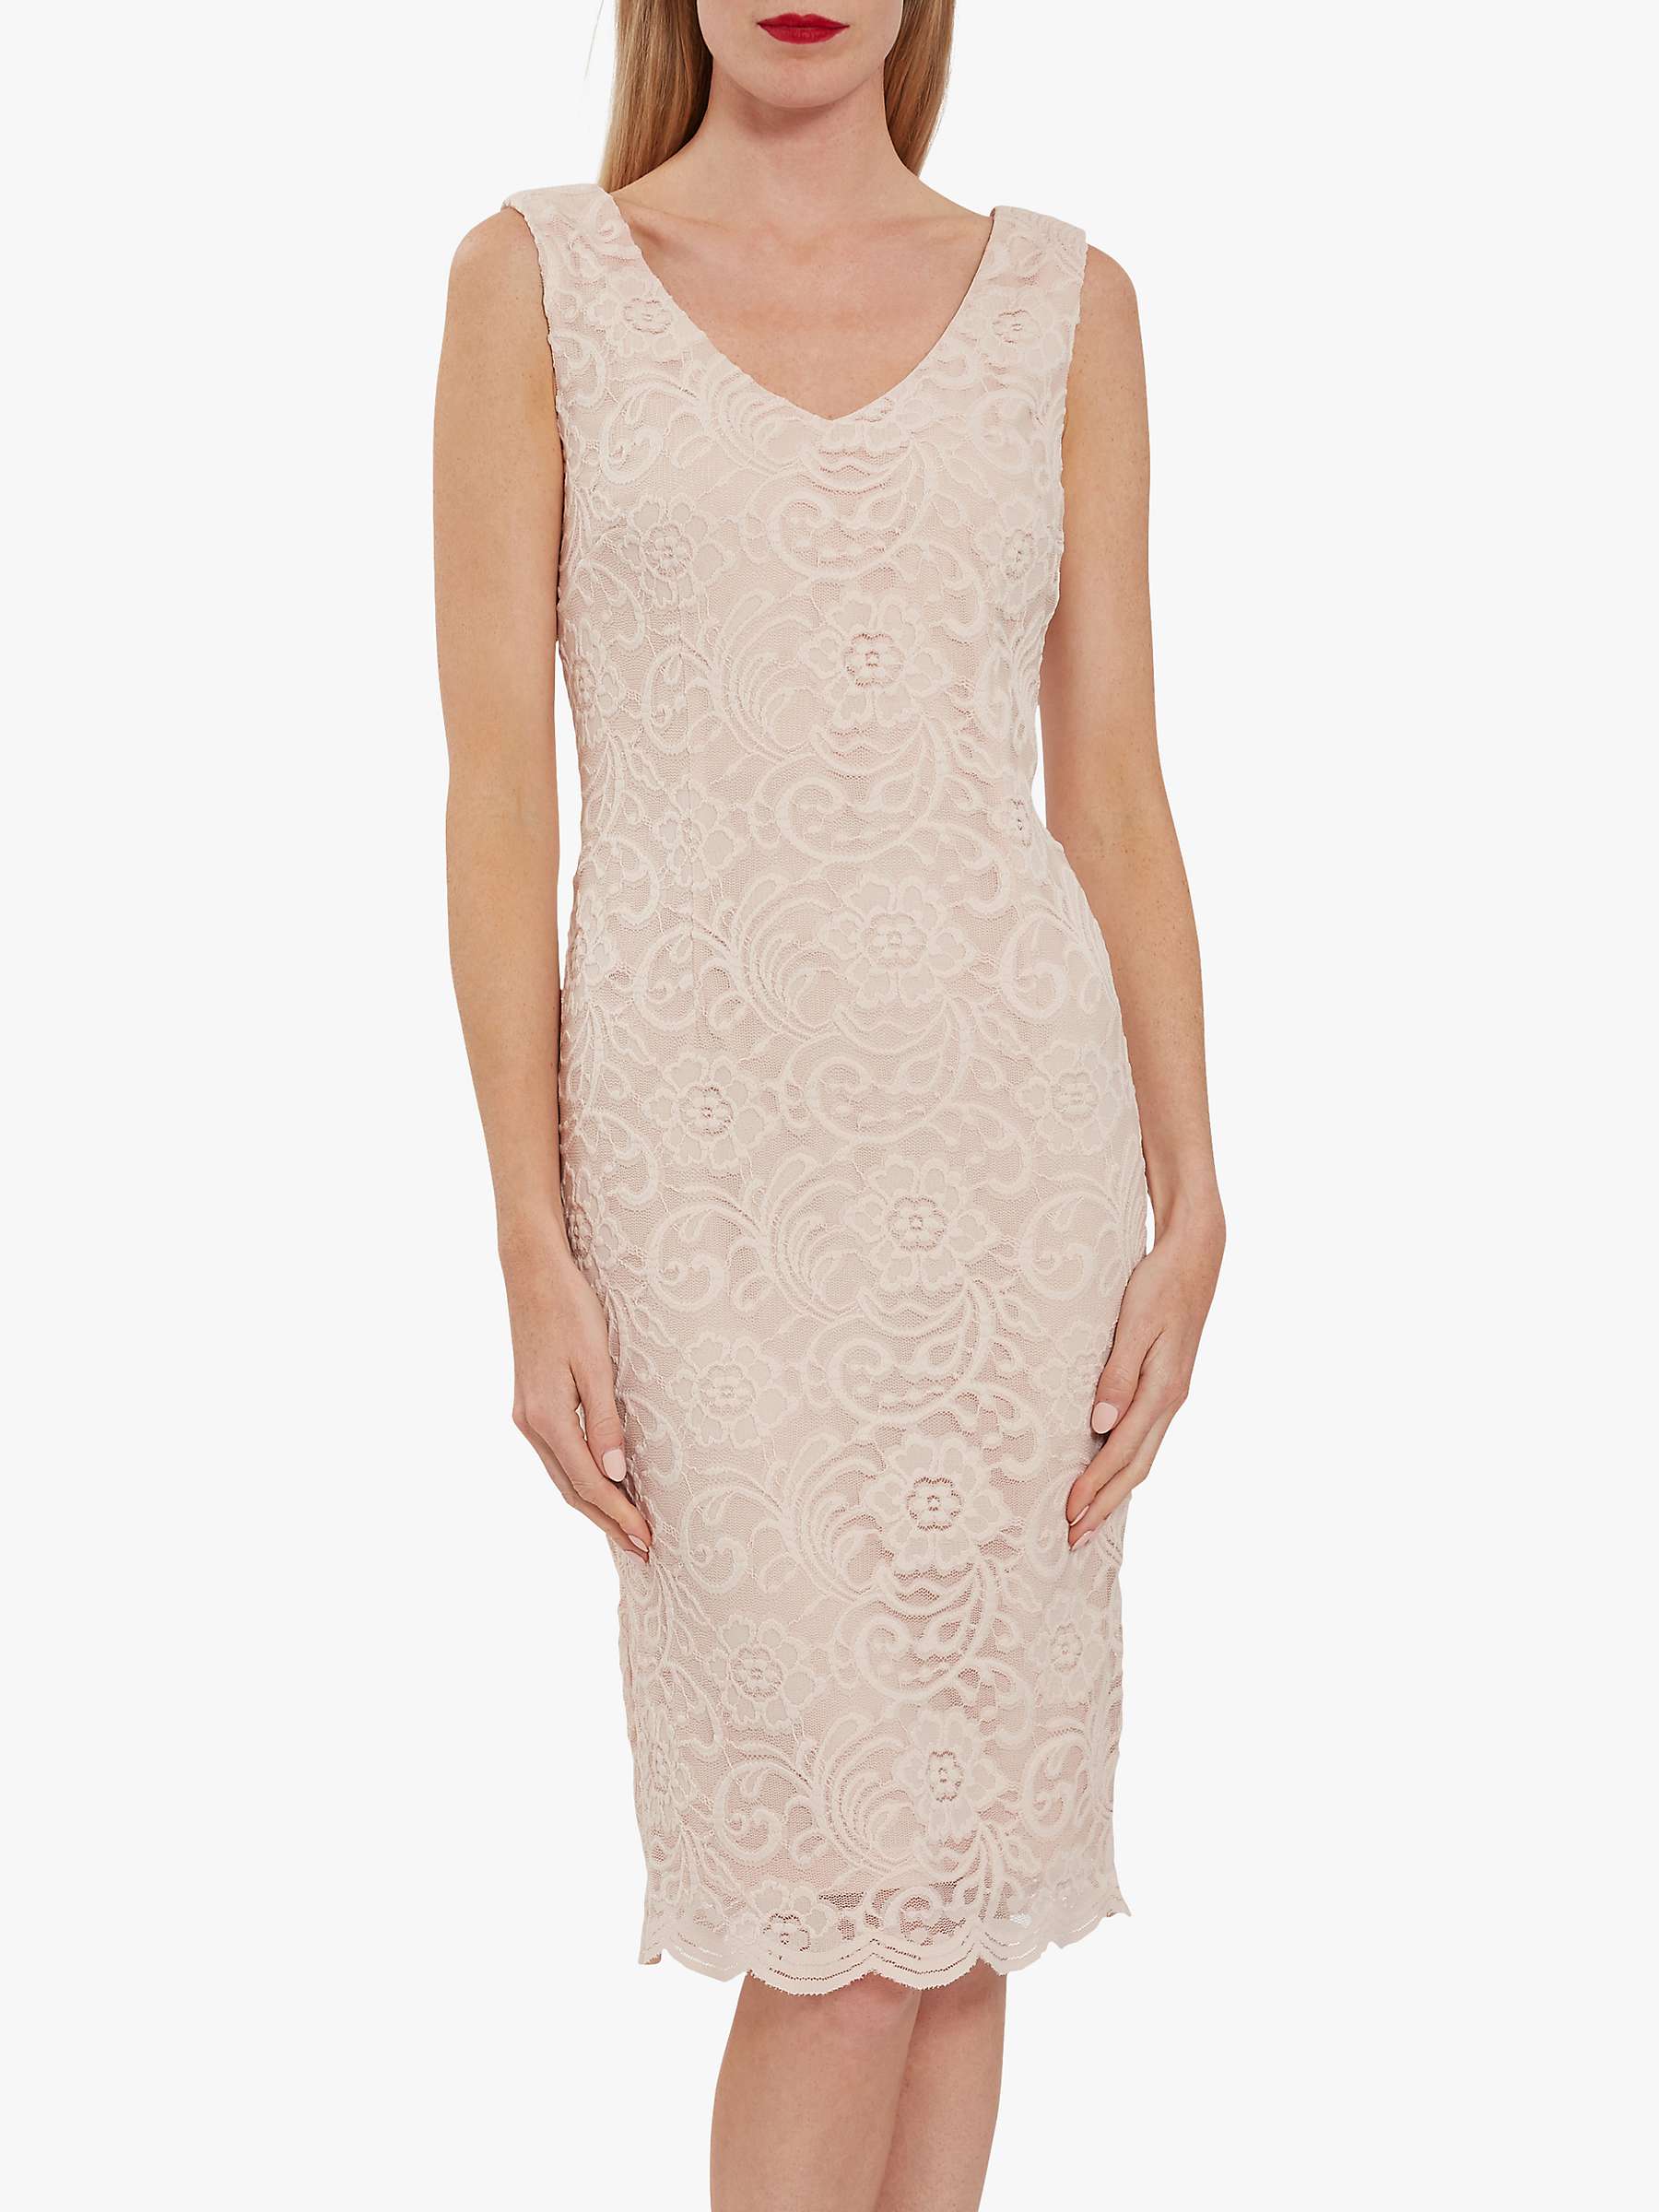 Buy Gina Bacconi Phylis Stretch Floral Lace Dress Online at johnlewis.com